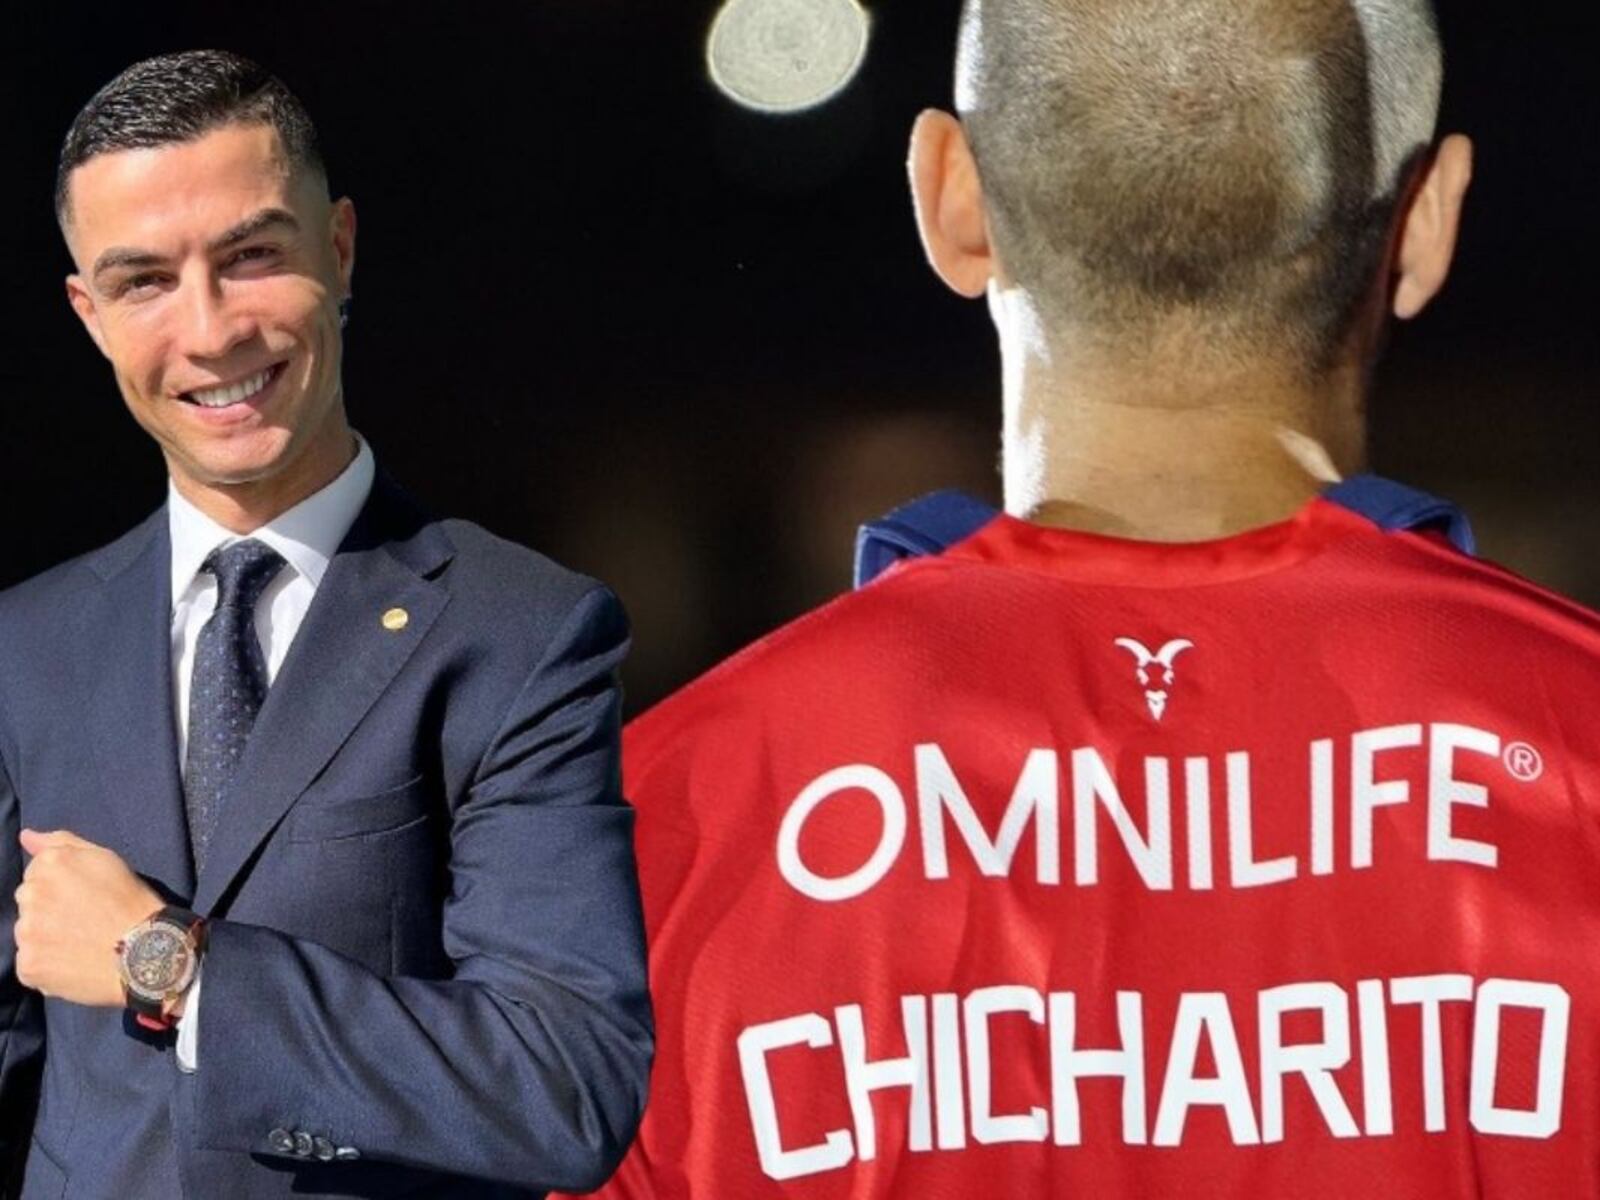 The luxury that Chicharito learned from CR7 at Madrid, and now has at Chivas